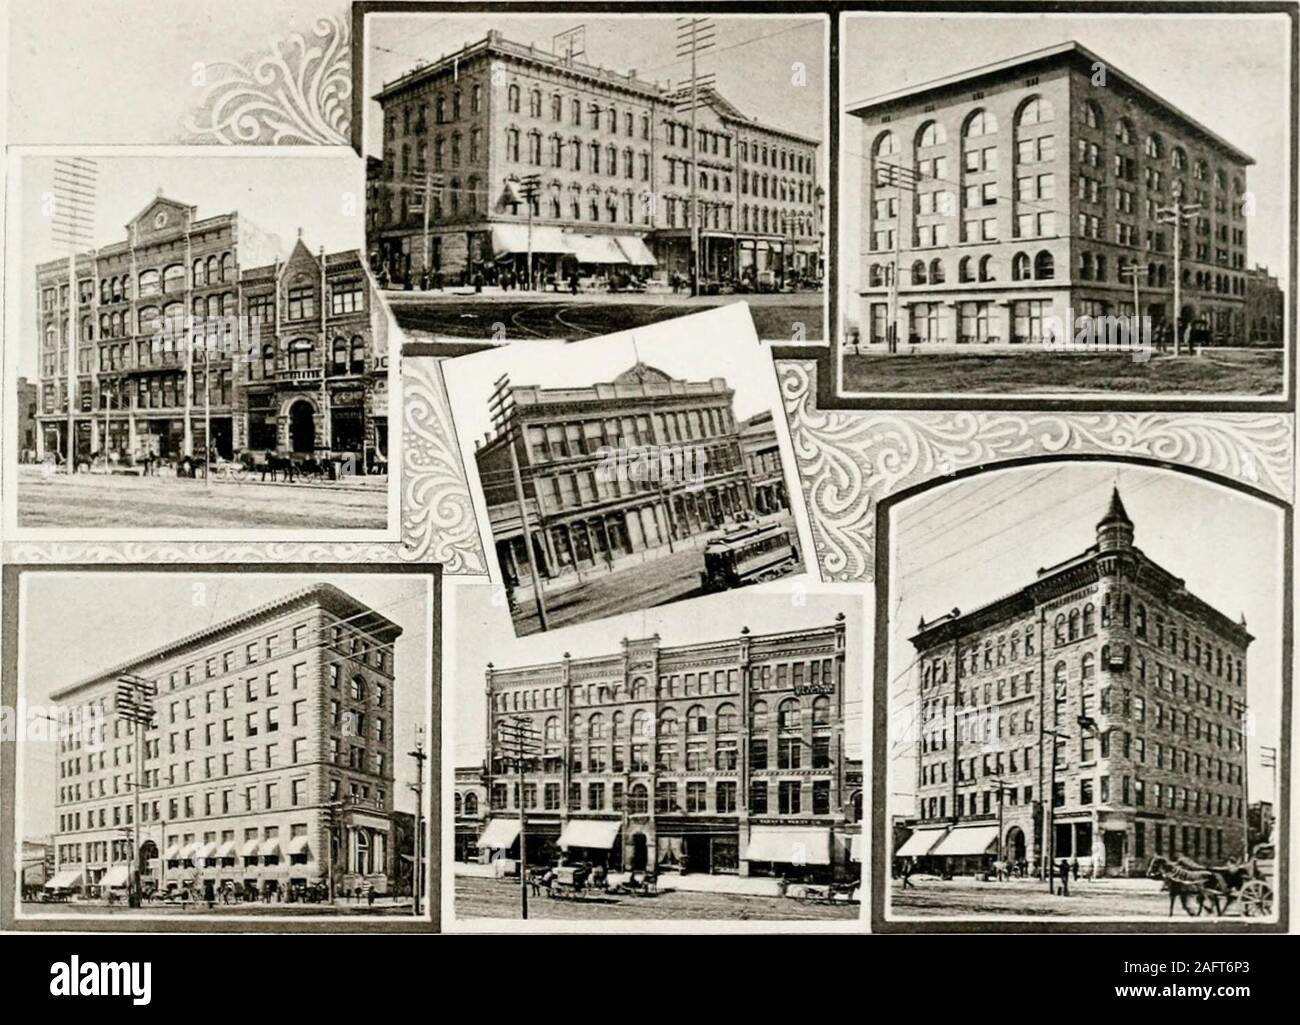 . Pictorial reflex of Salt Lake City and vicinity: including letter-press description and illustrations of public edifices, hotels, business blocks, churches, Indians, bathing resorts, etc., and a variety of information, valuable for the tourist or resident, from reliable sources. &lt;il KENYON HOTEL.KNUTSFORD HOTEL. BRIGHAM YOUNGS SCHOOL HOUSE. SECTION OF ROOF OF TABERNACLE.OLDEST HOUSE IN UTAH, BUILT BY THE PIONEERS.. CULMER BLOCK.MCCOKNICK BLOCK. WAHSATCH BLOCK.CO-OPERATIVE STORE.OLD CONSTITUTION BLOCK.BUSINESS BLOCKS. DOOLY BLOCK.COMMERCIAL BLOCK. Stock Photo